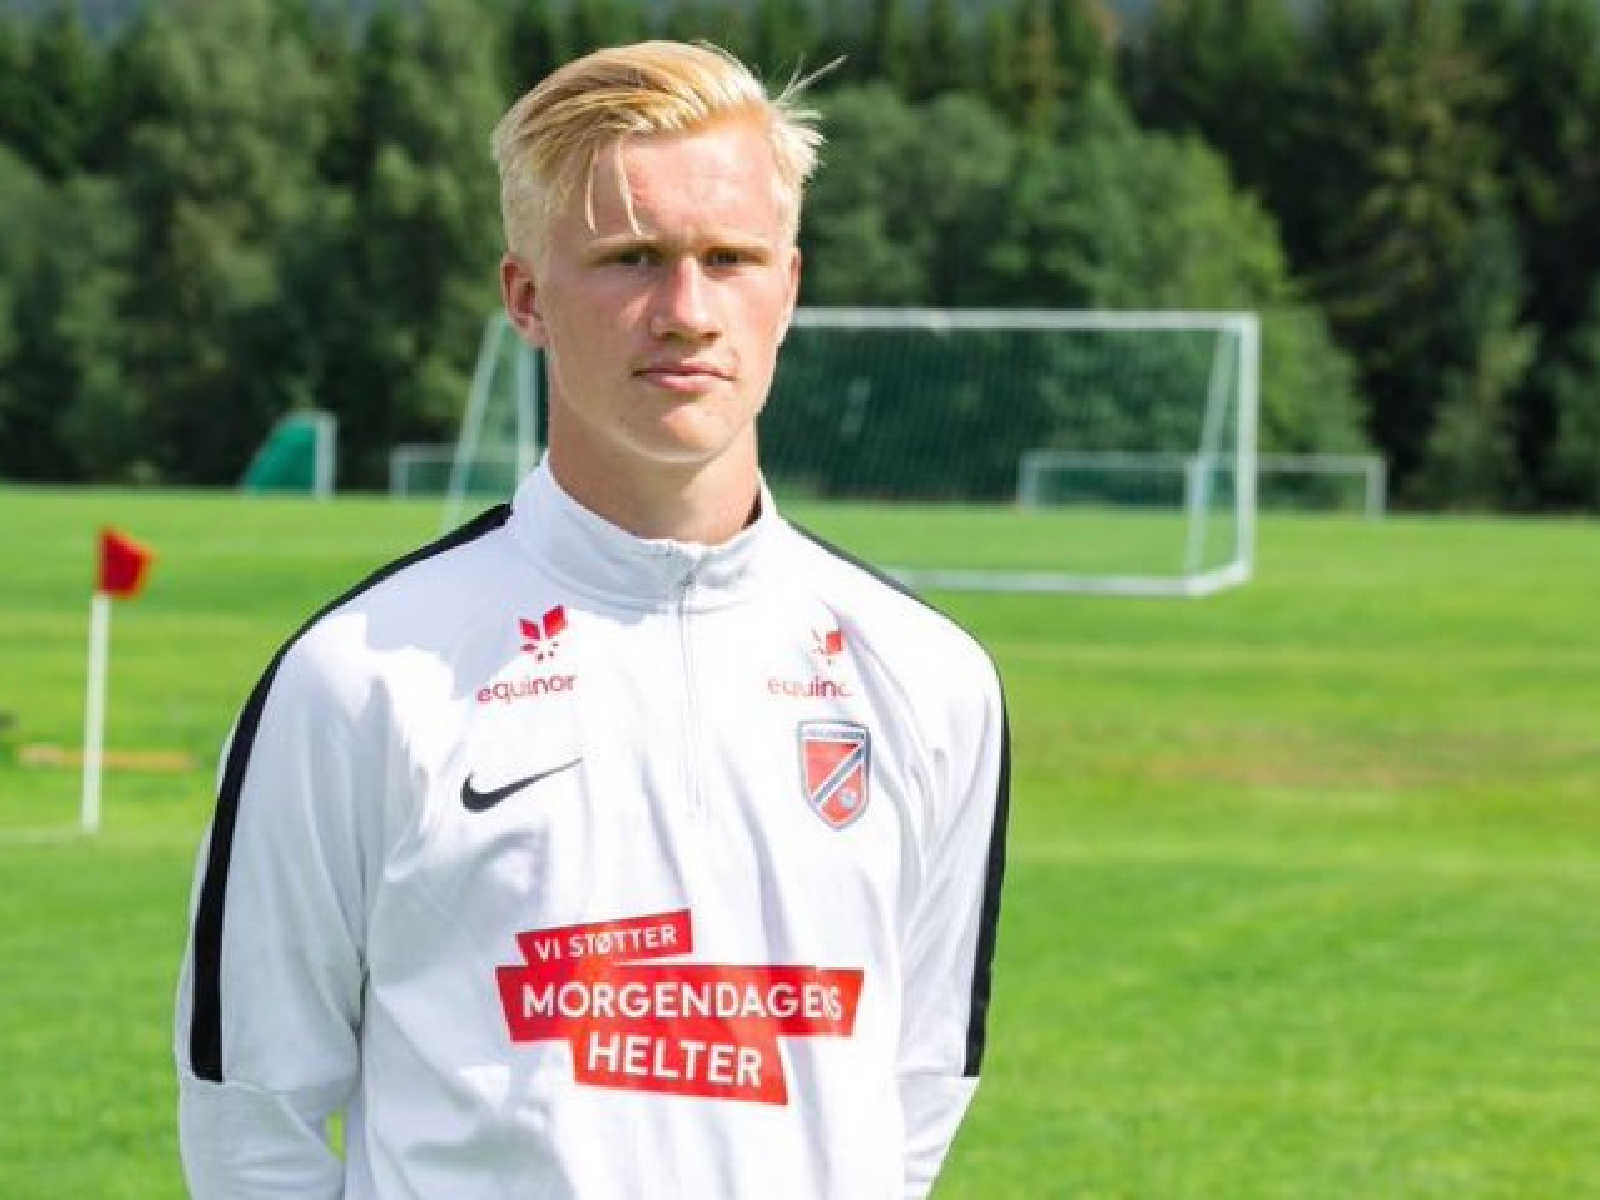 Erling Haaland’s cousin has Twitter shook with his goalscoring exploits in Norway